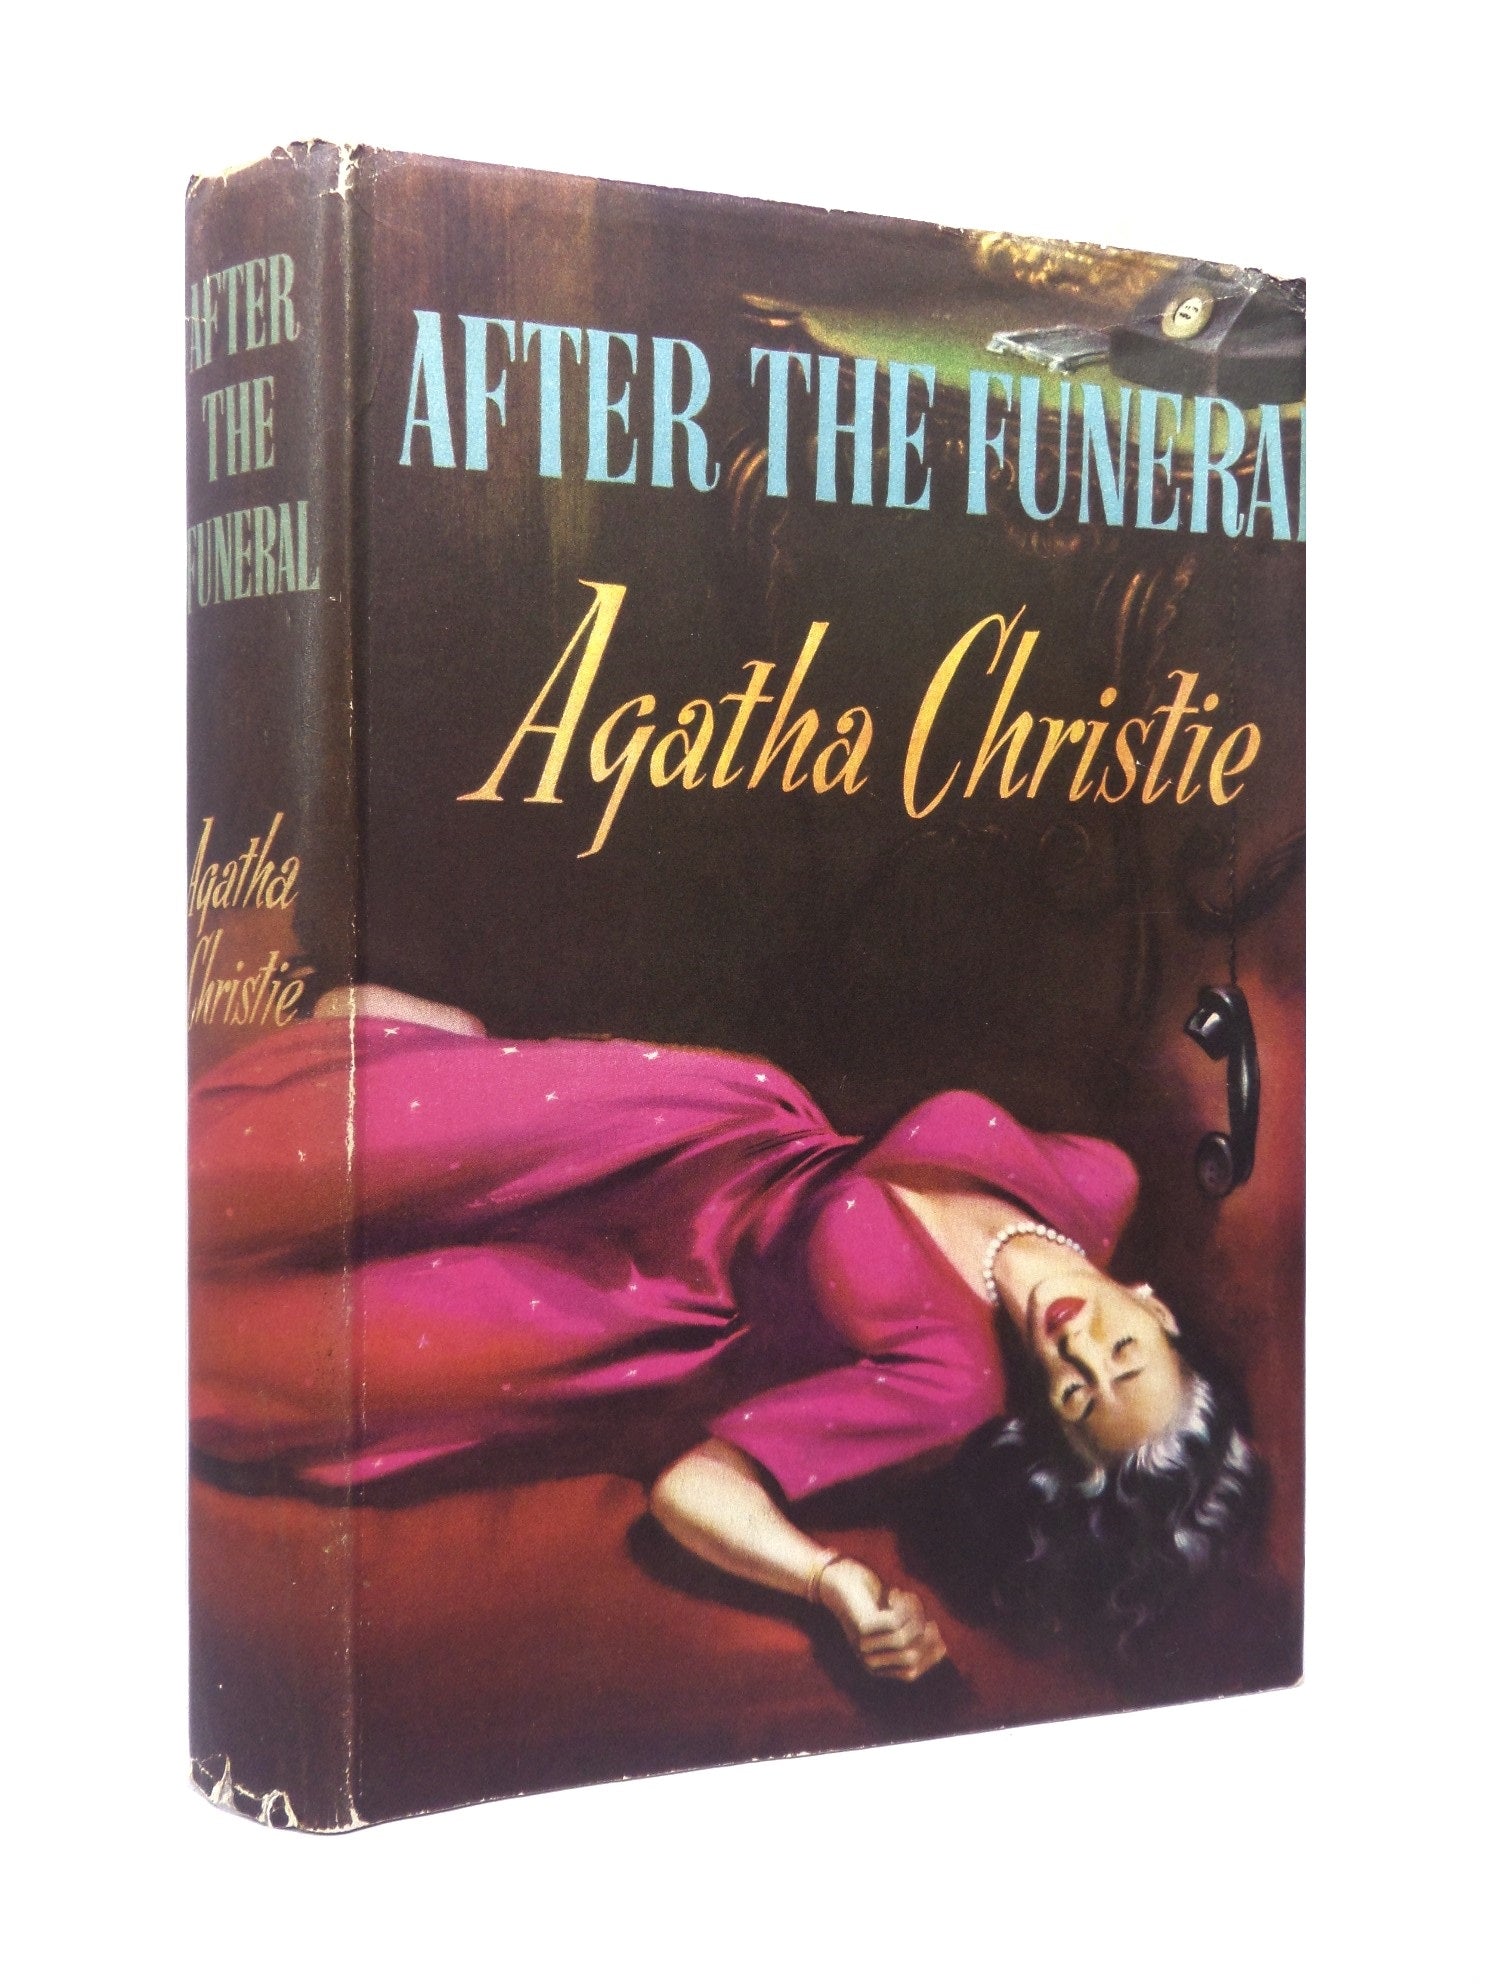 AFTER THE FUNERAL BY AGATHA CHRISTIE 1954